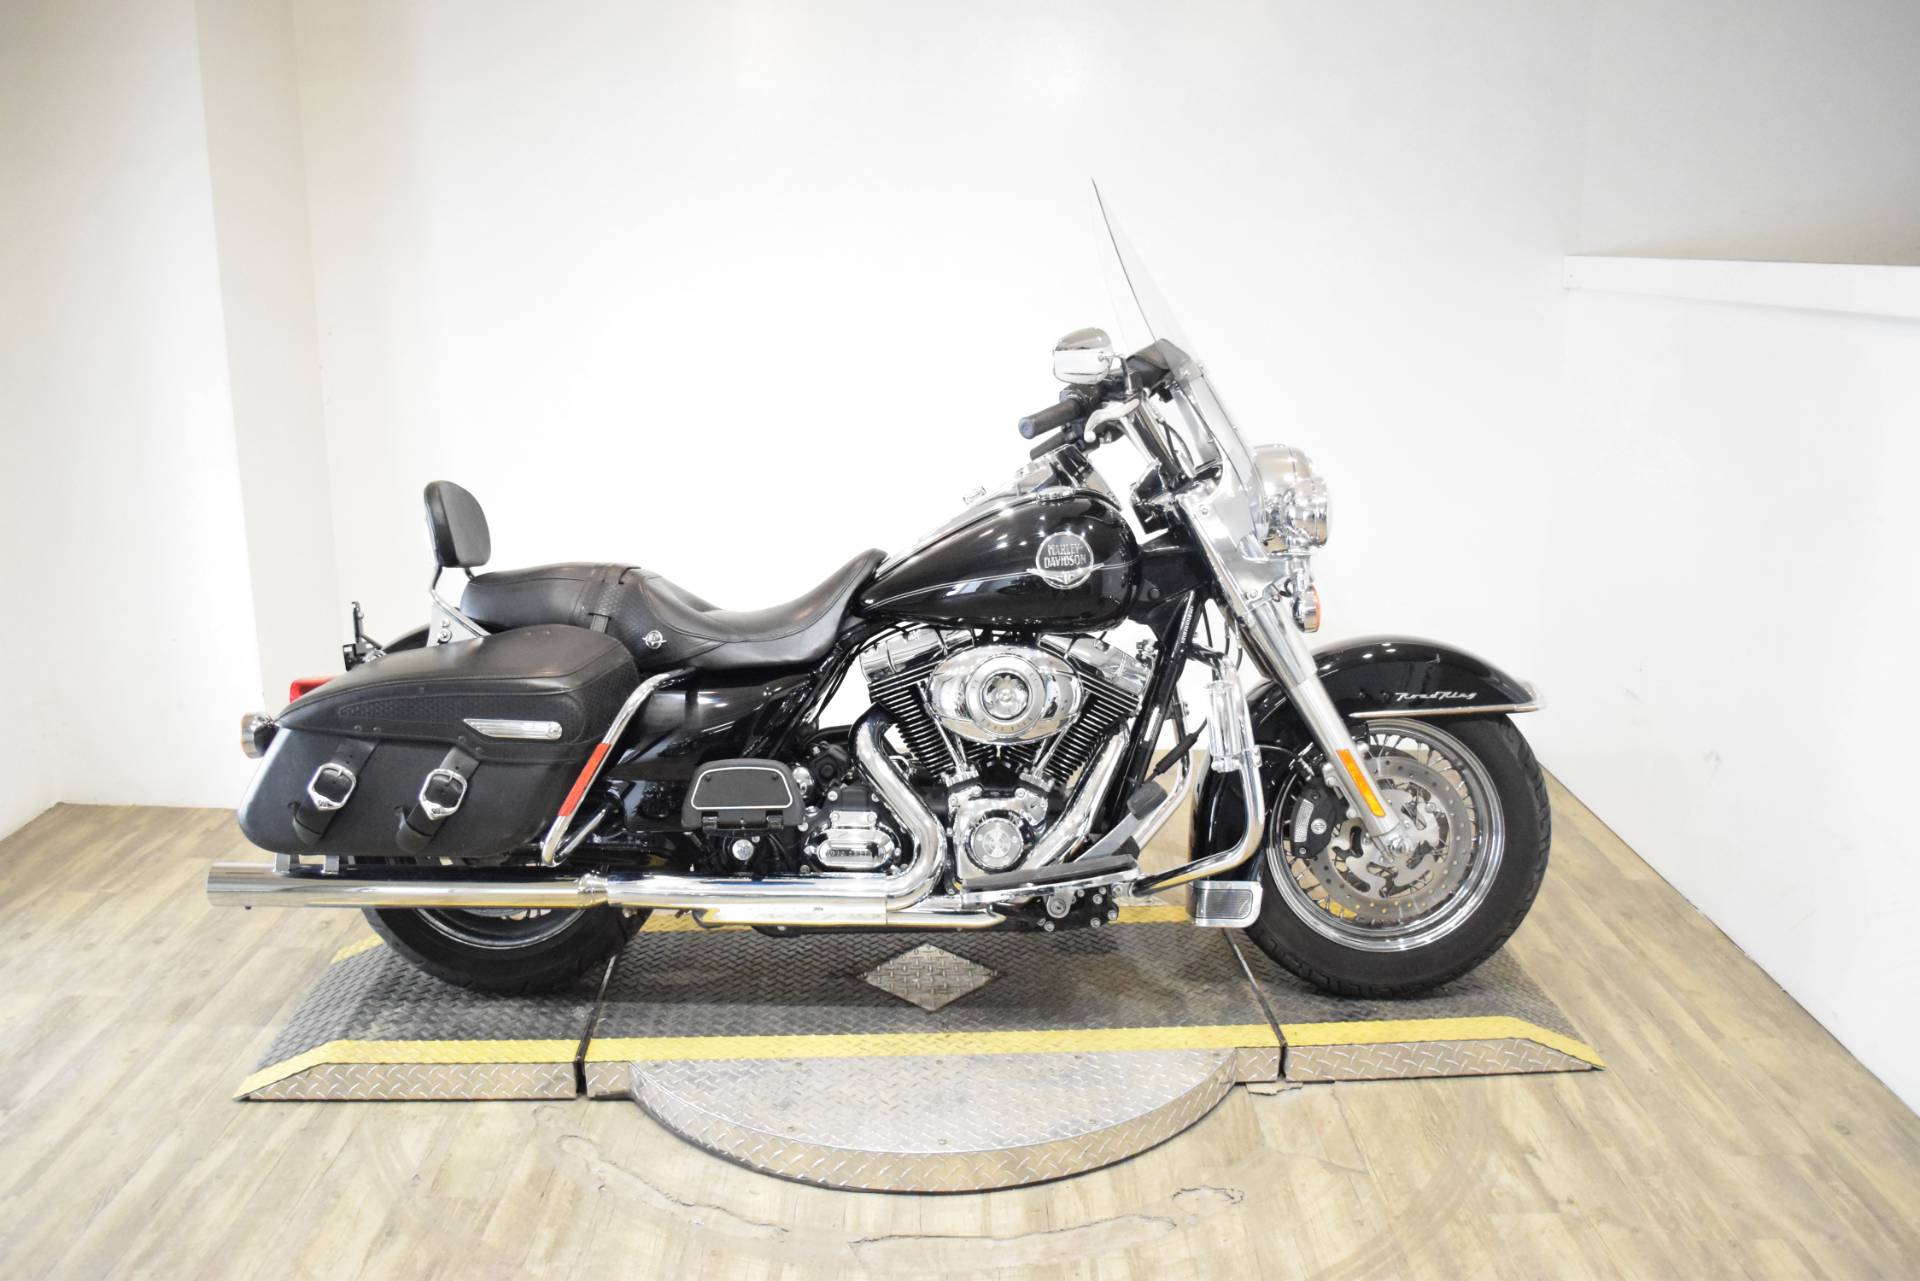 2010 Harley Davidson Road King Classic Used Motorcycle For Sale Wauconda Illinois